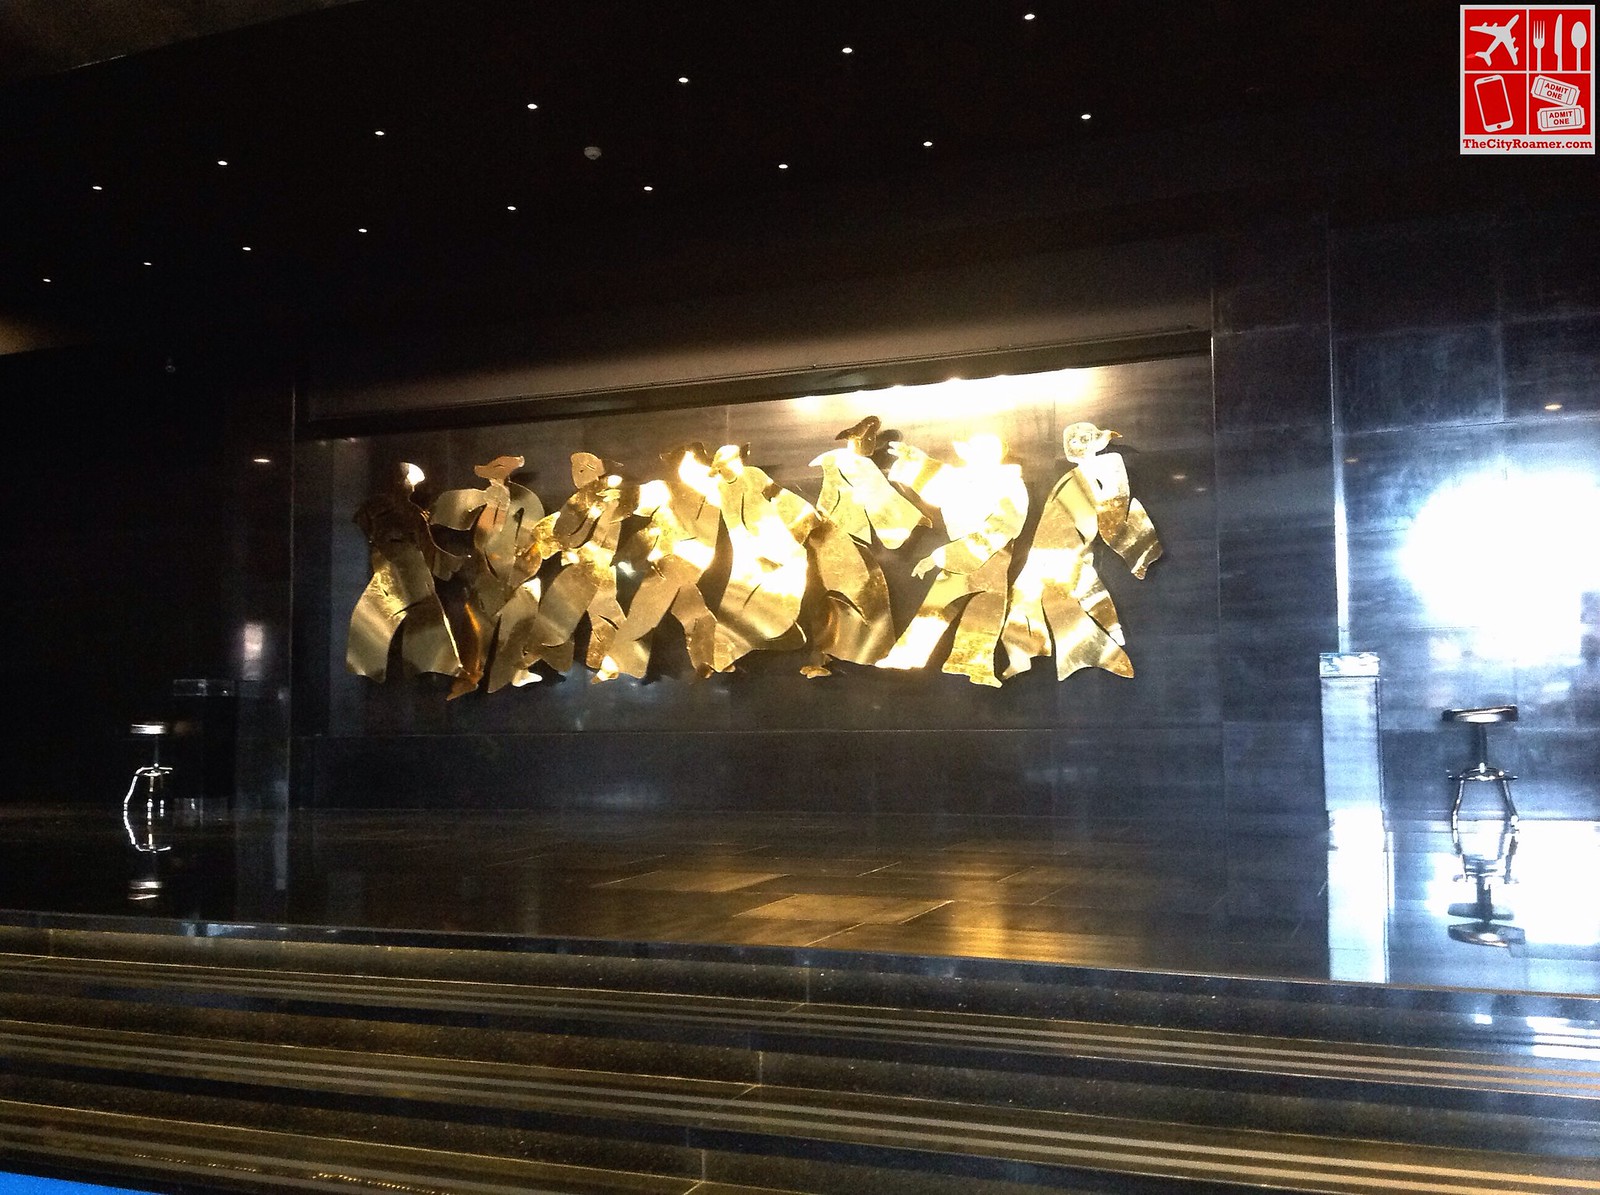 8 Movements - a mural by Bencab at the new Promenade Greenhills Cinemas lobby